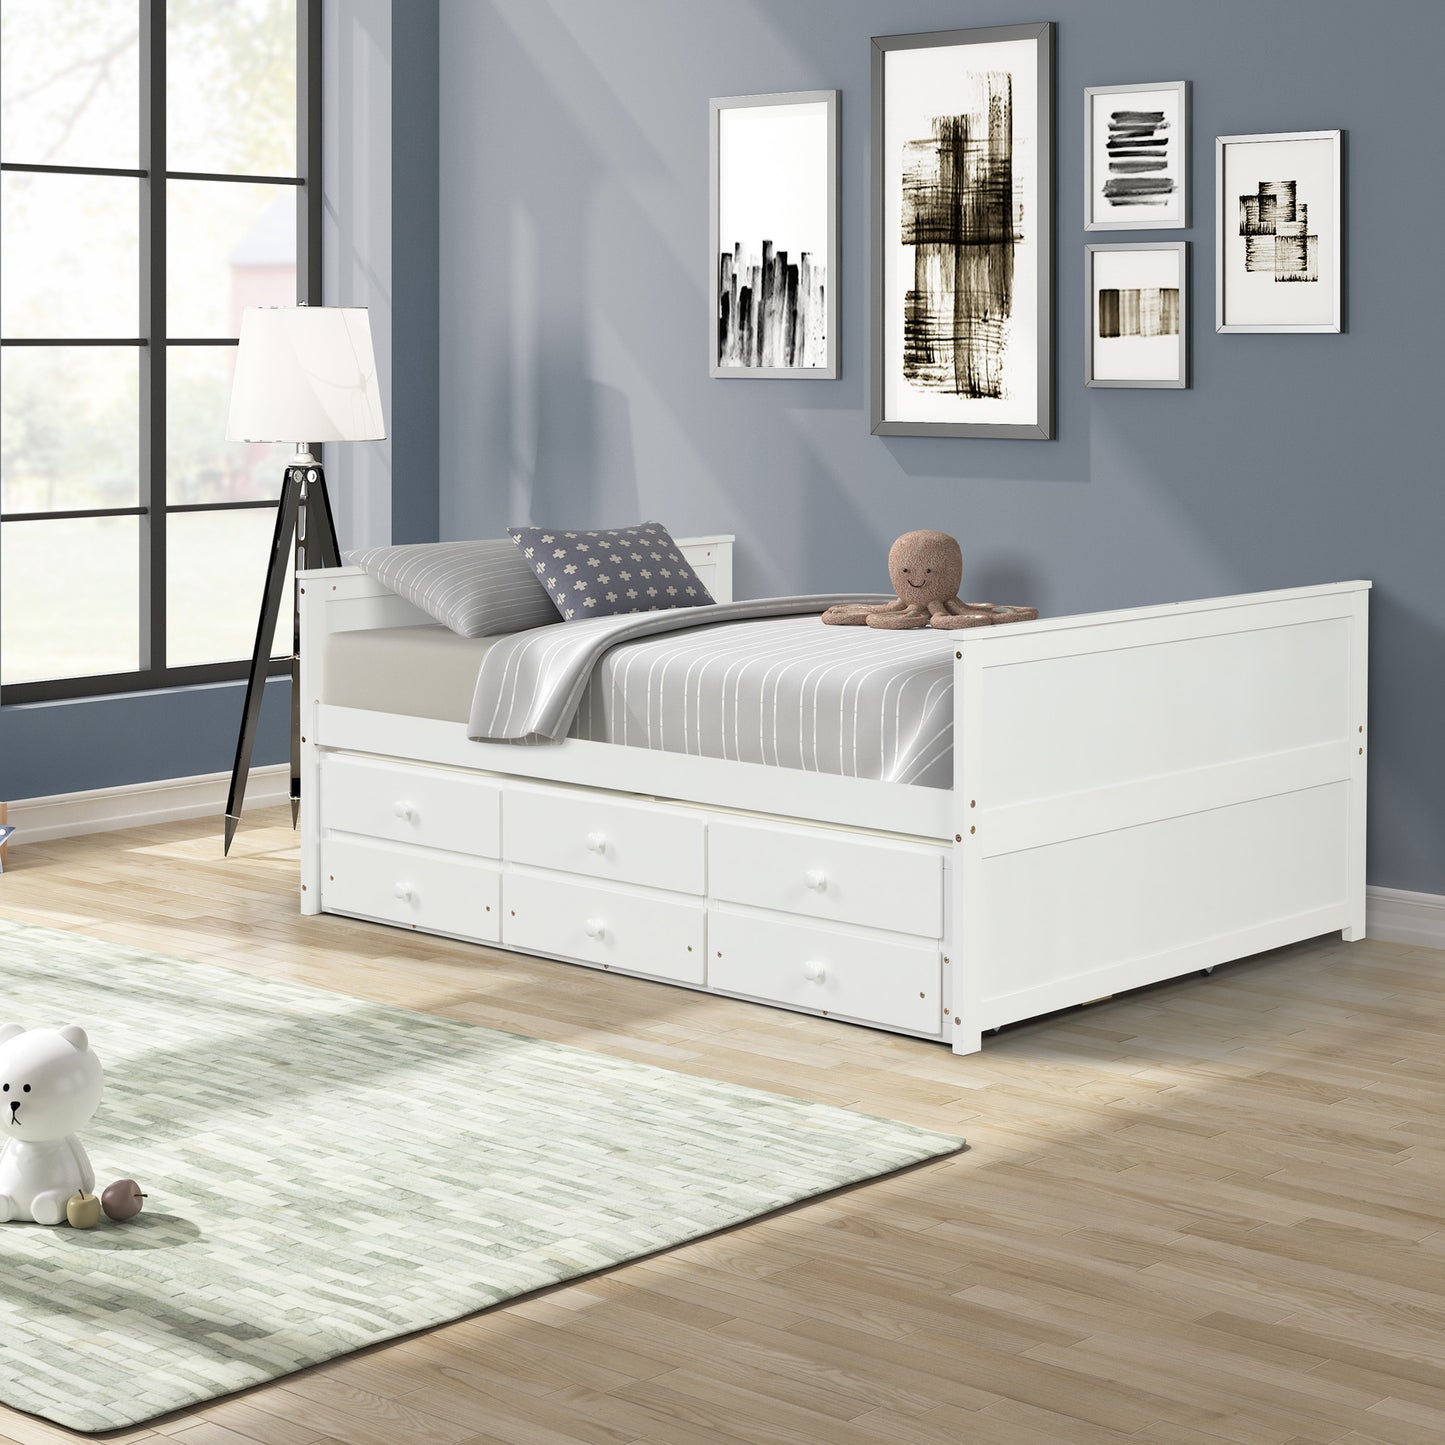 SYNGAR Bed Frame with Storage, Full Platform Bed with Trundle and 3 Storage Drawers for Kids Teens Adult, White, LJ2569